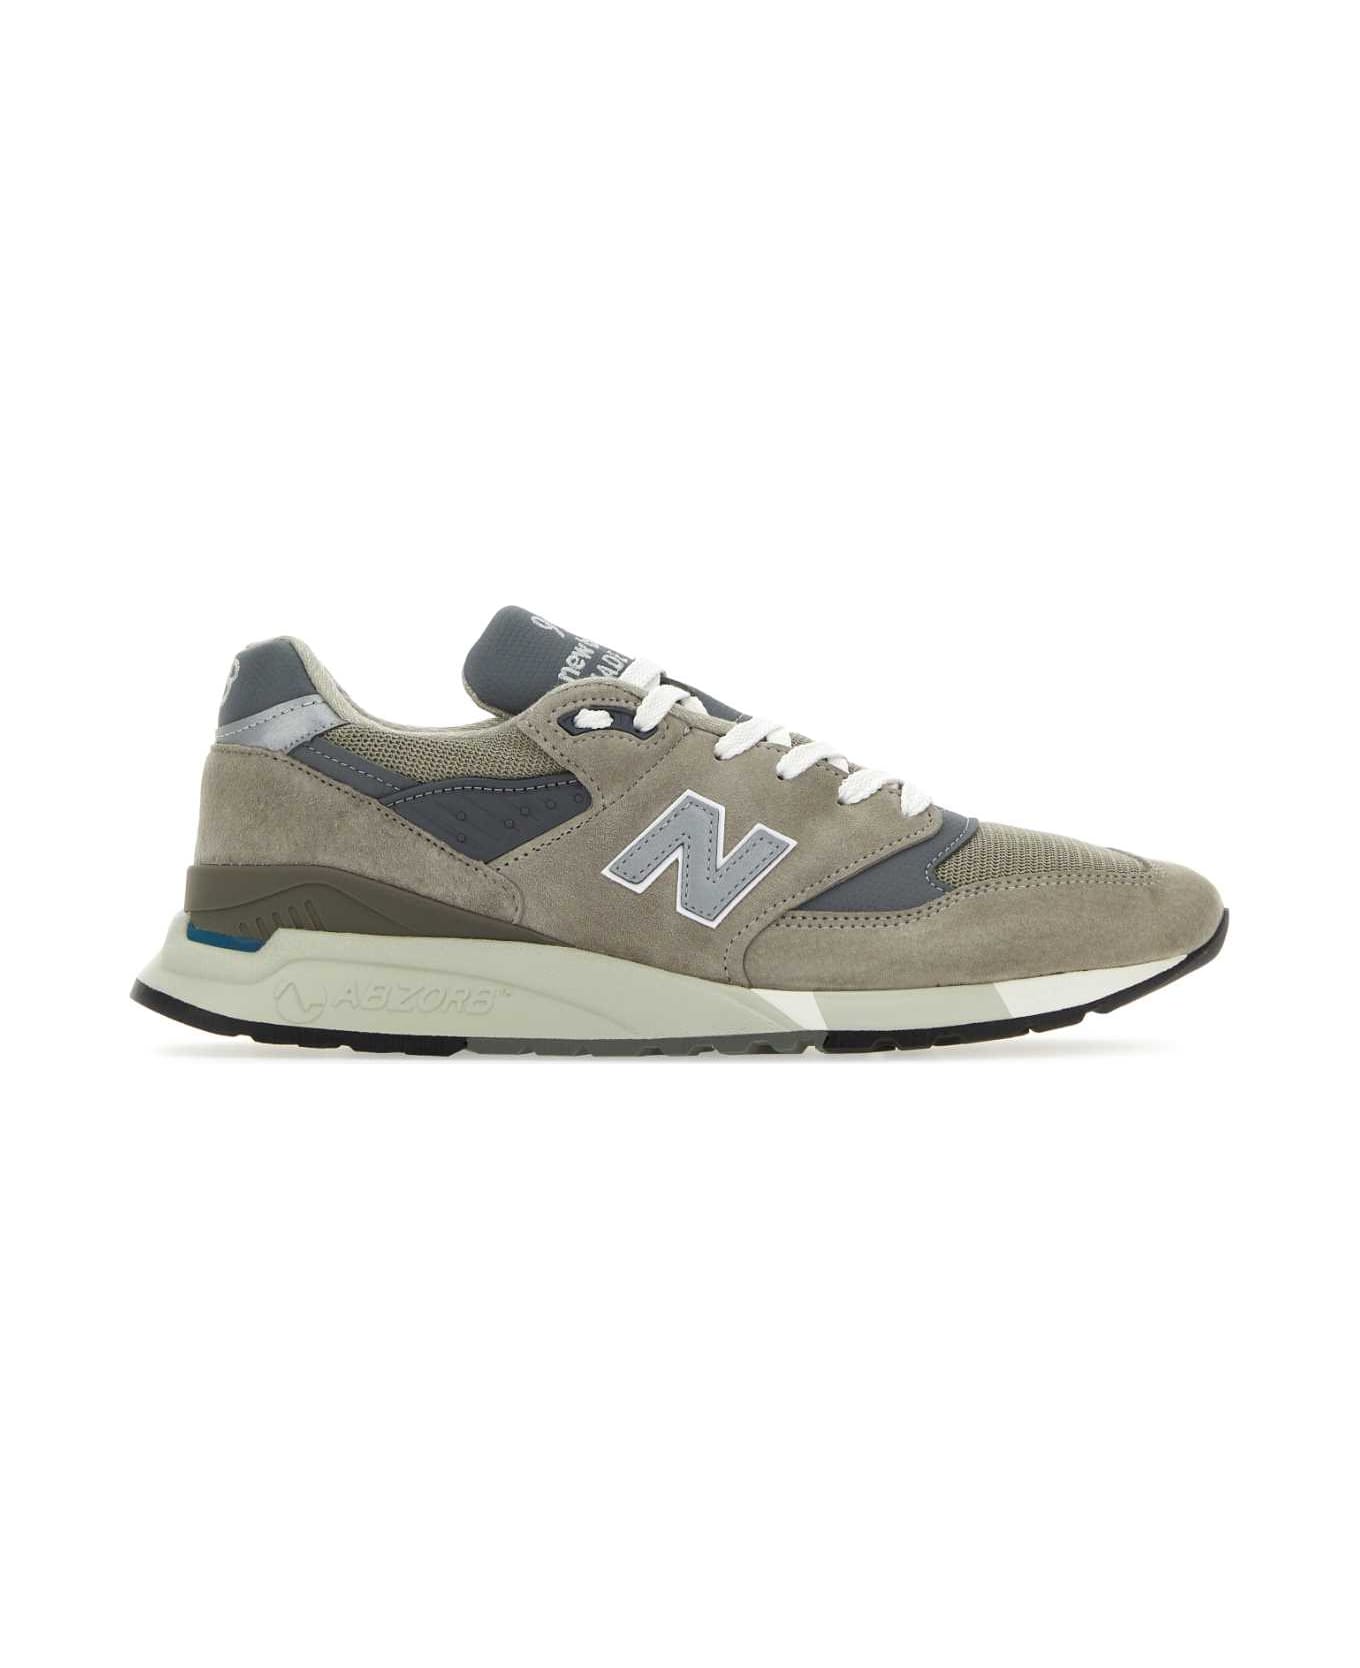 New Balance Multicolor Suede And Fabric U998gr Sneakers - GREY